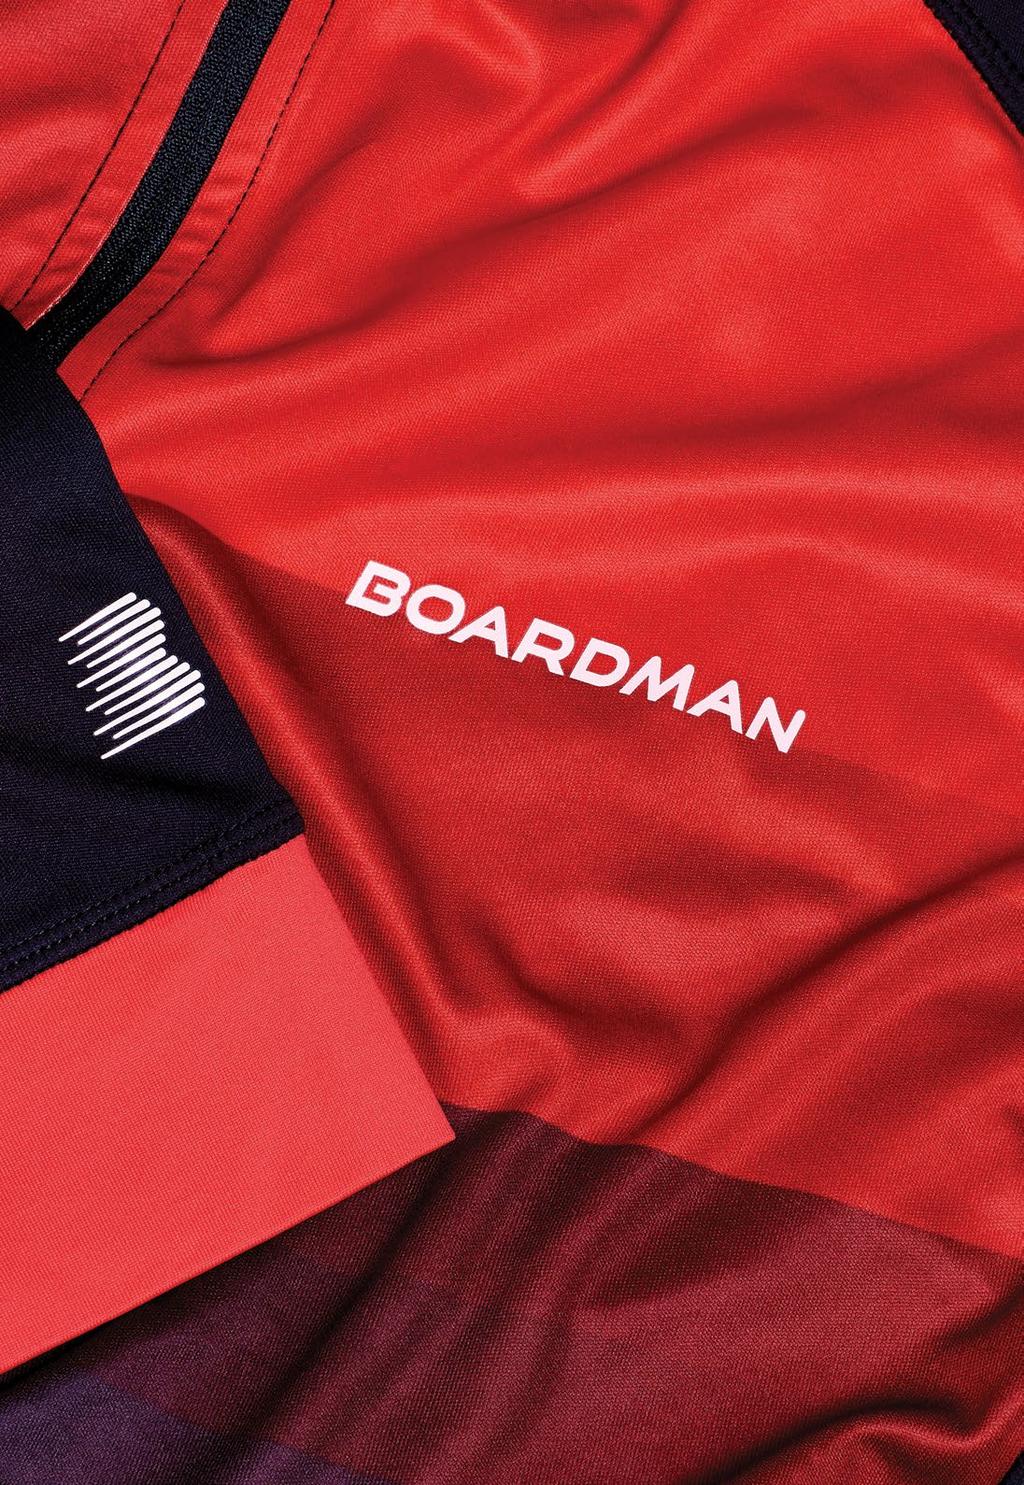 This season to complement the Boardman bike